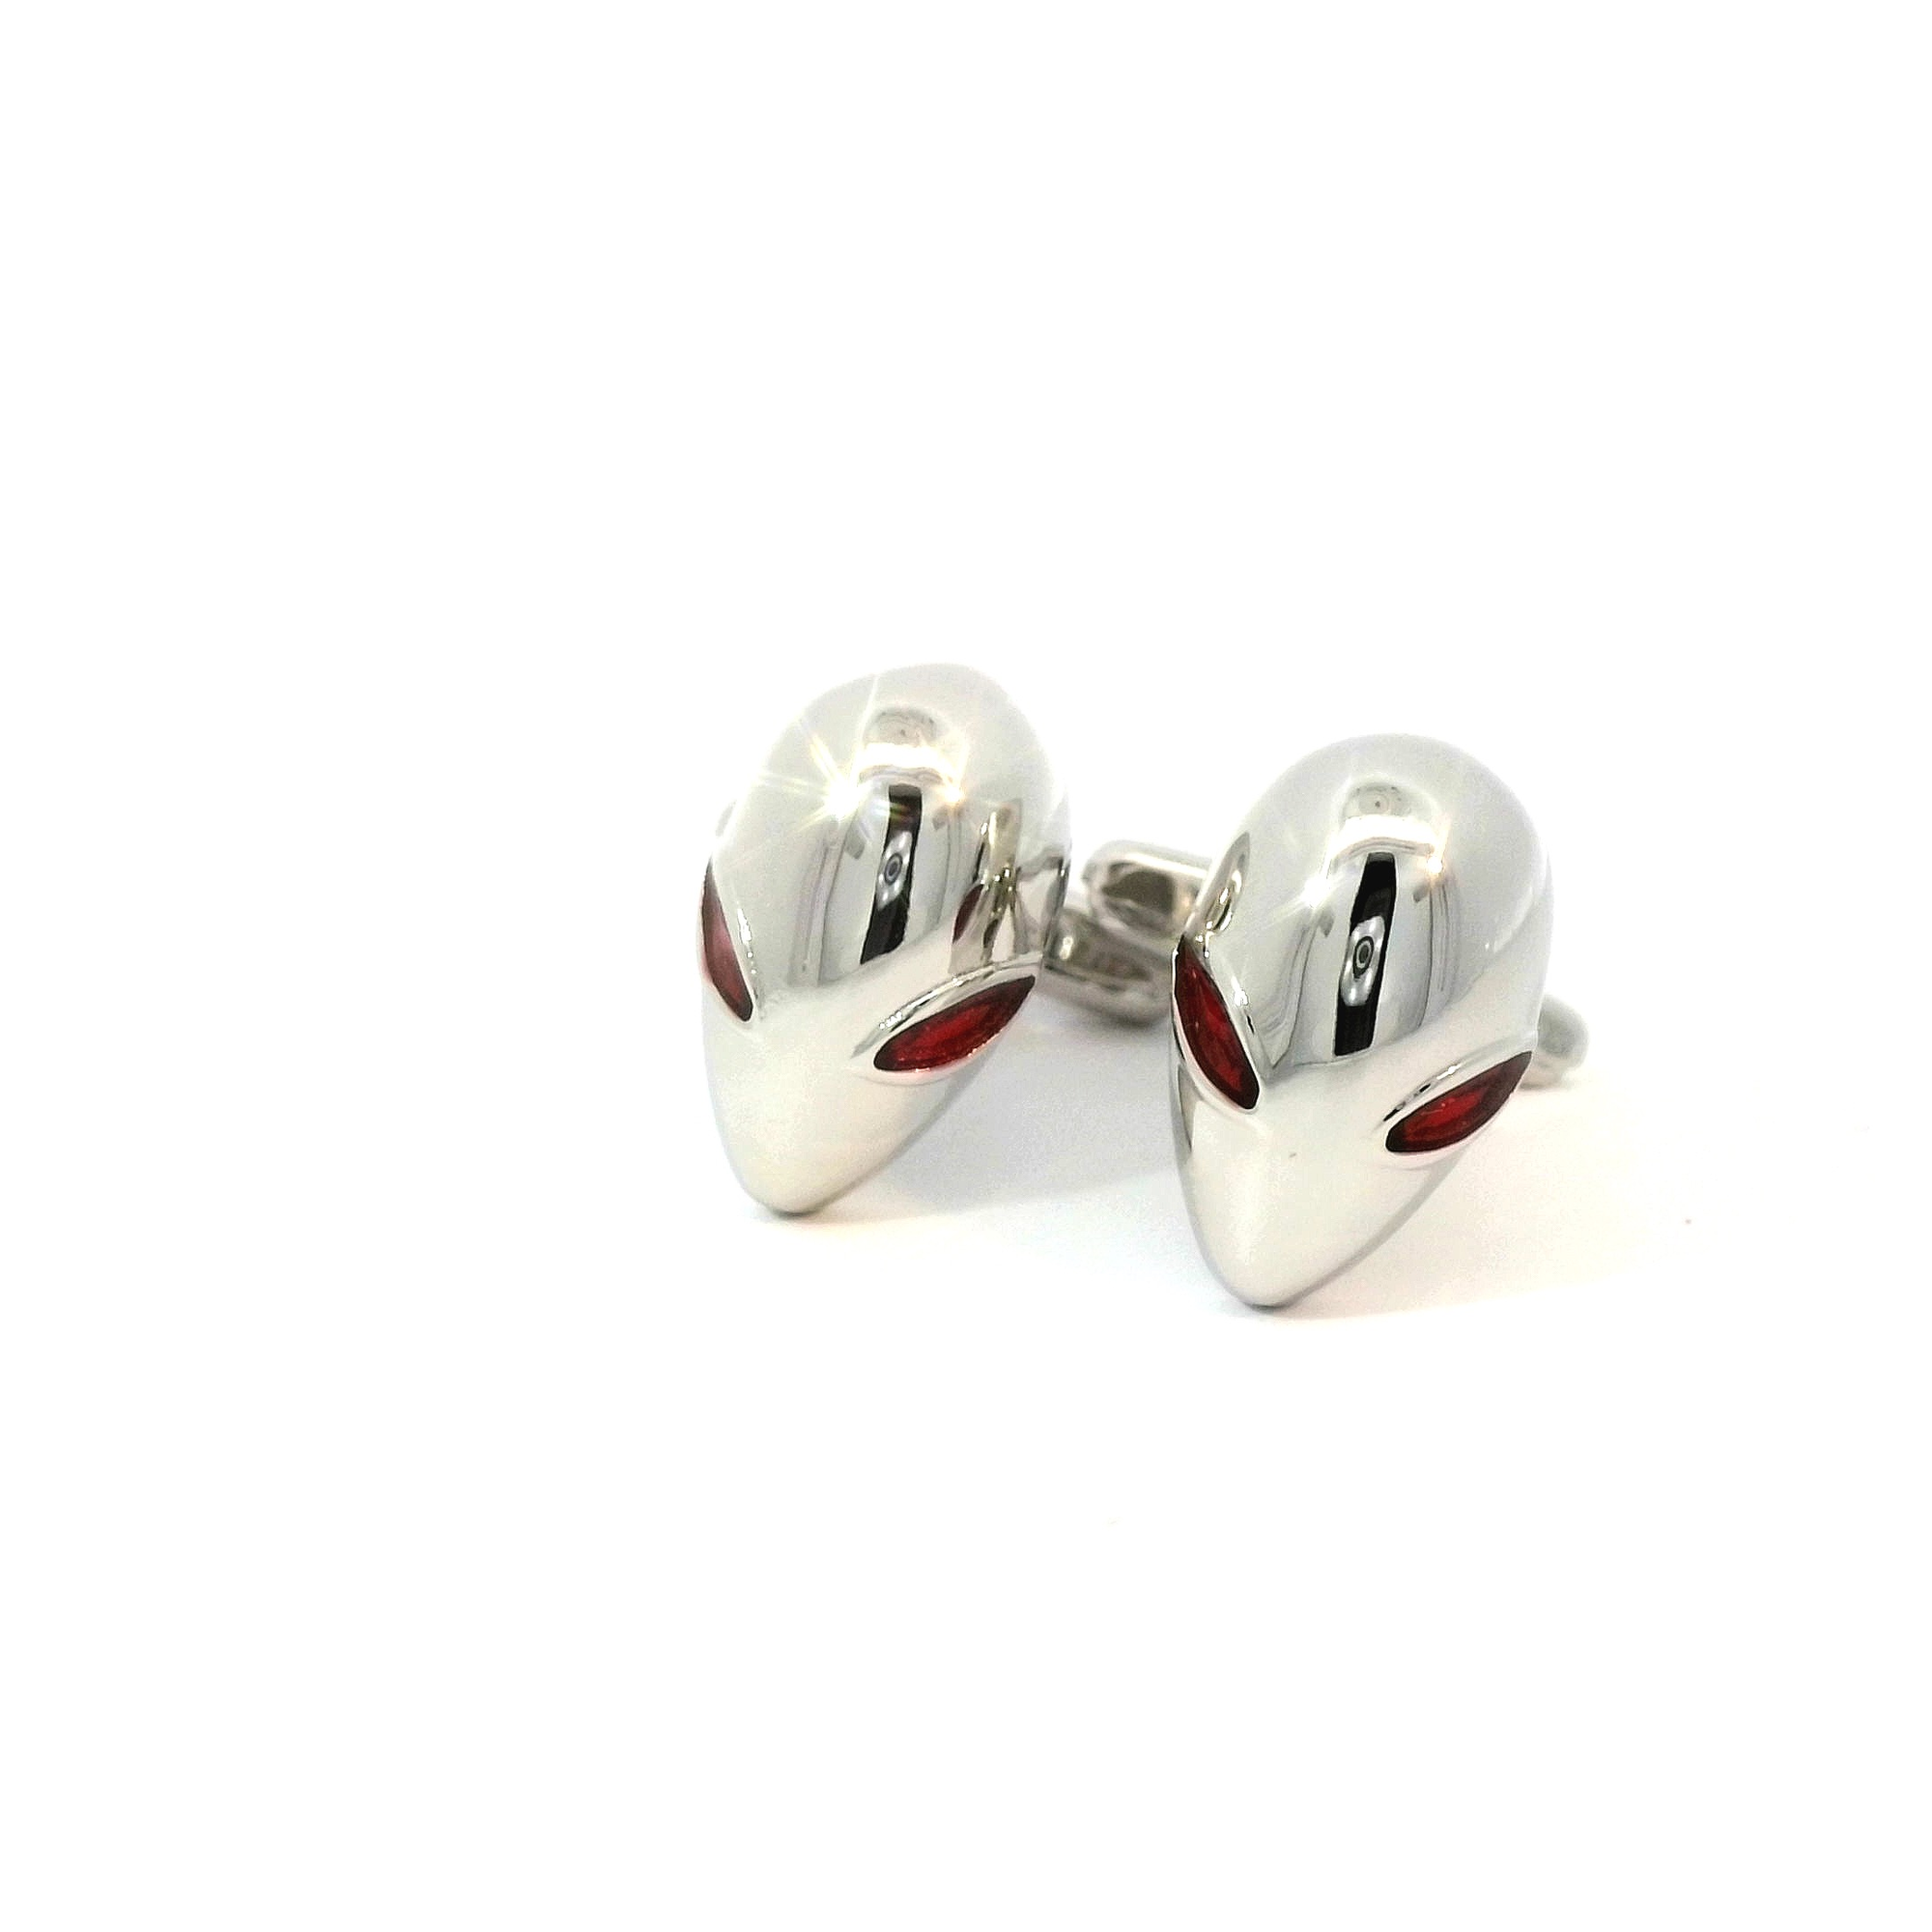 Aliens with Red Crystal Eyes Cufflinks